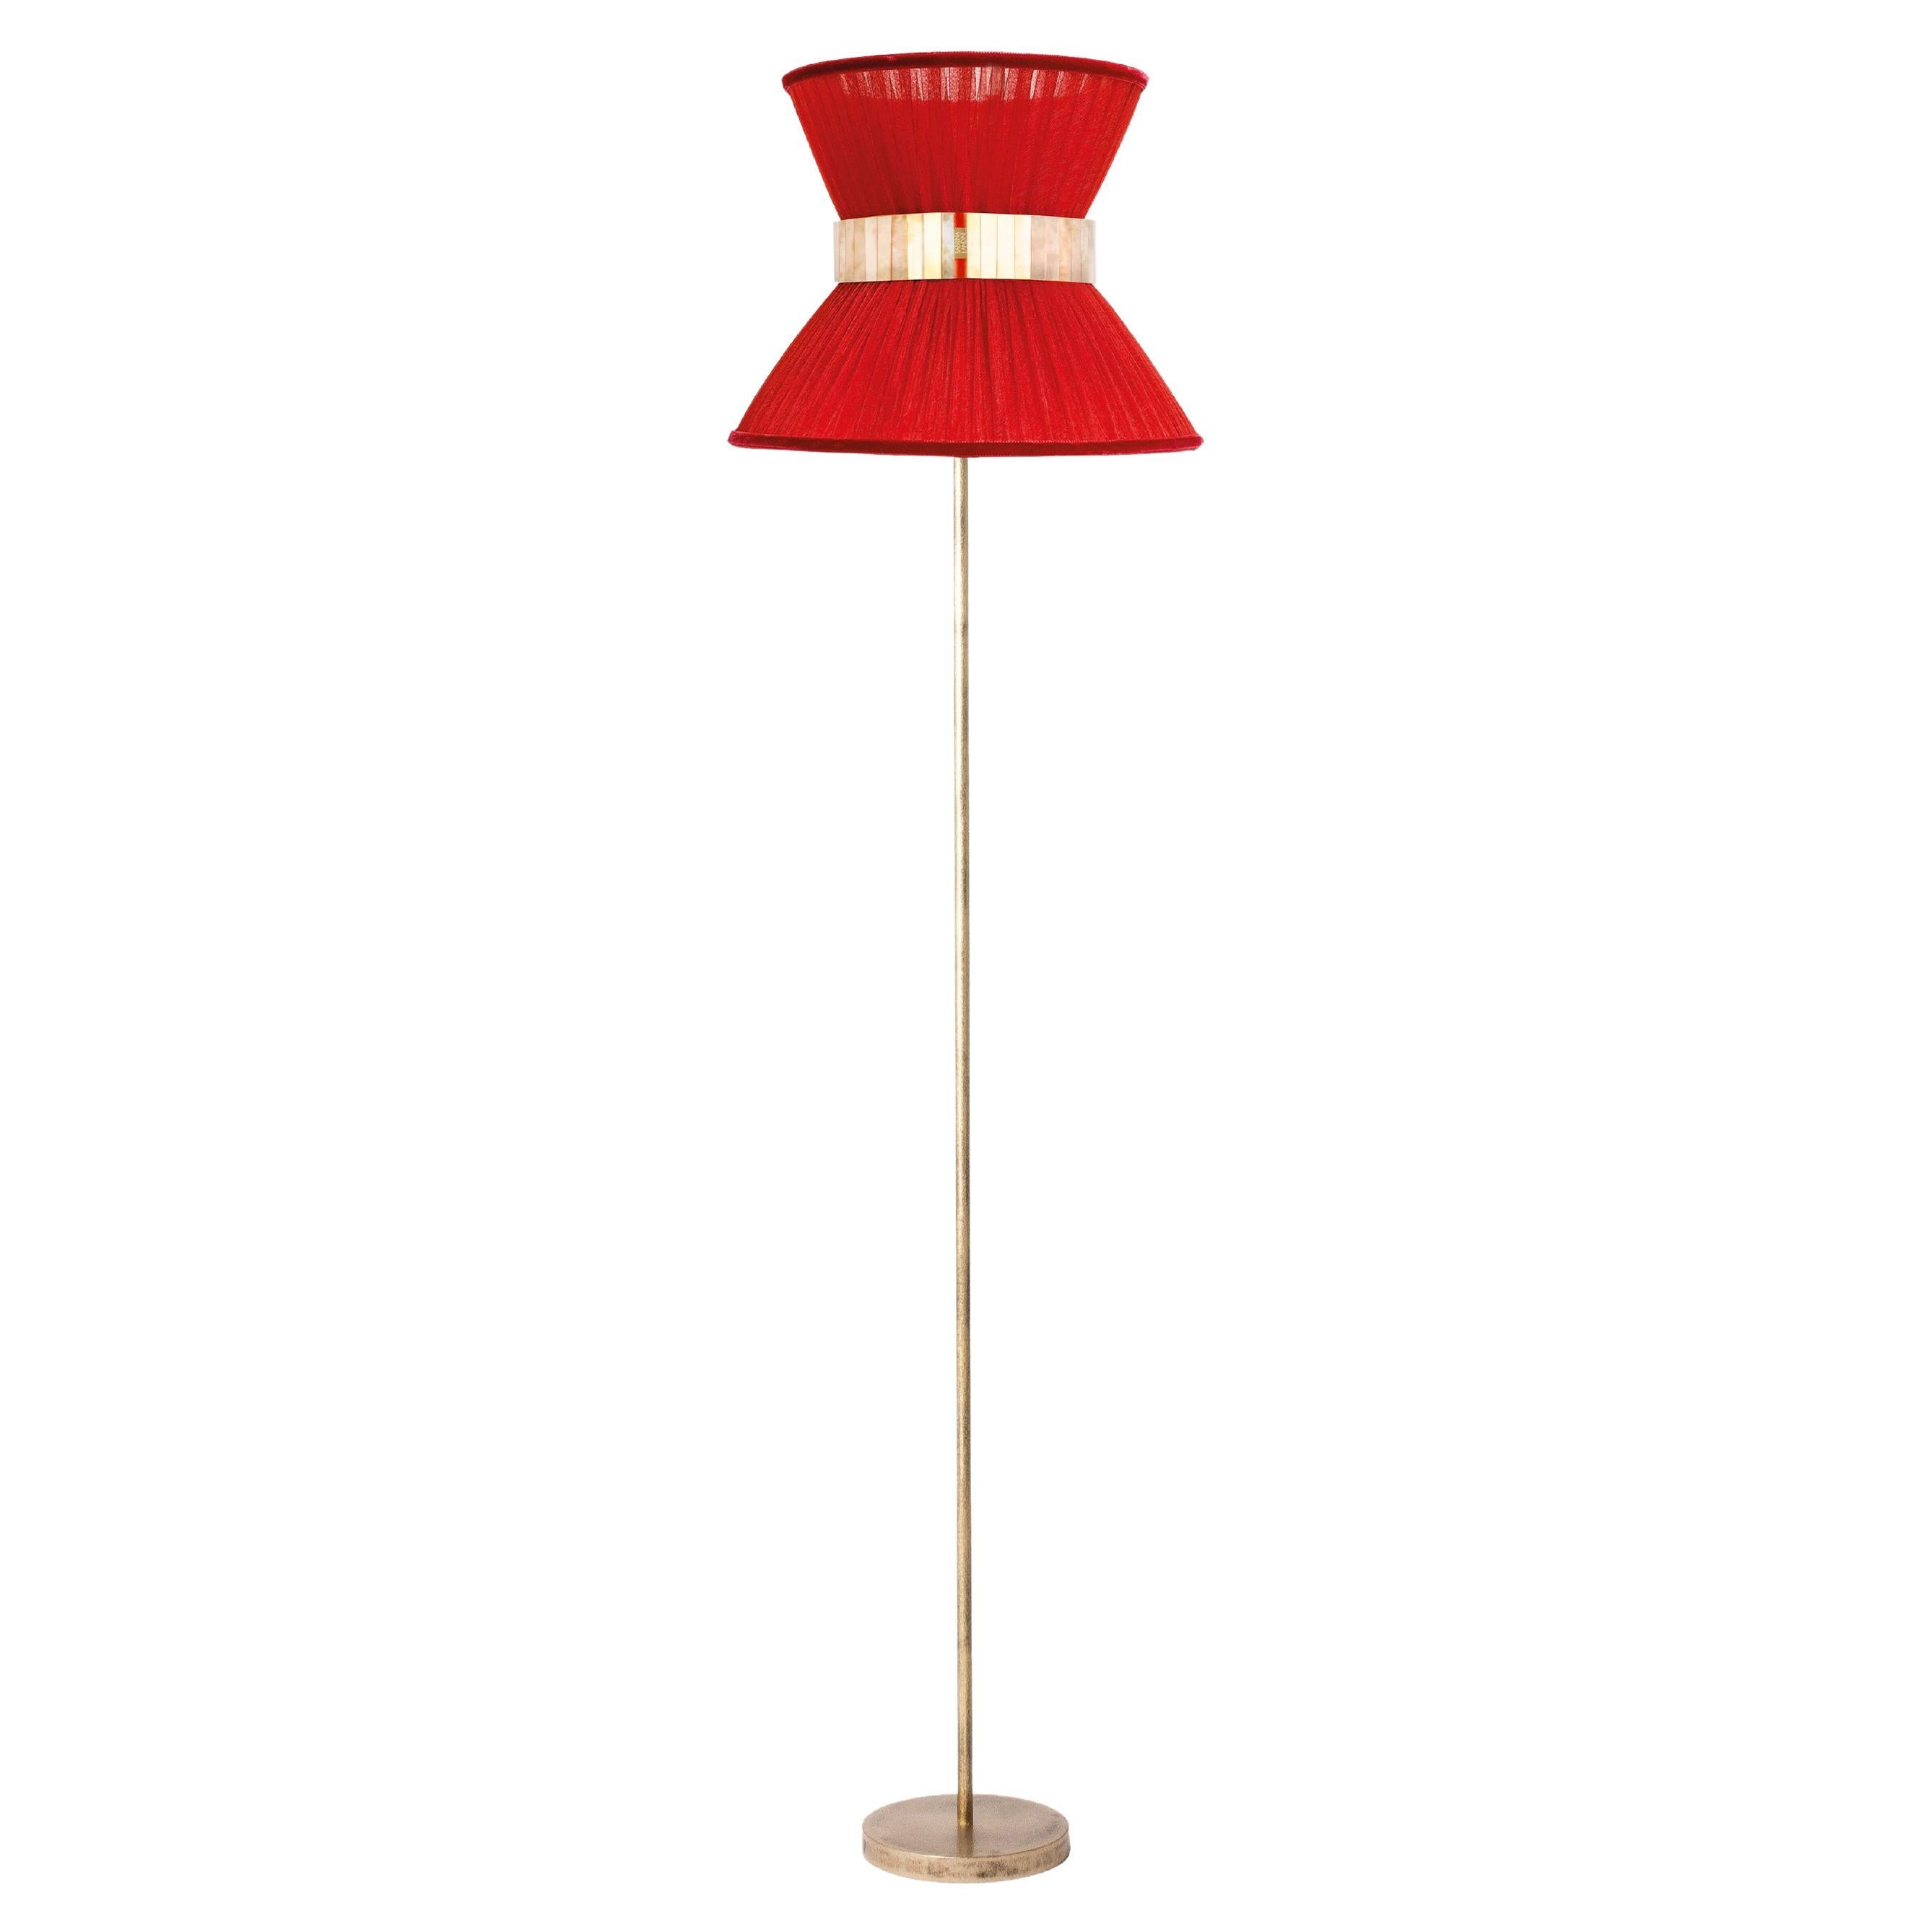 "Tiffany" Floor Lamp 40 Rust-Red Silk, Antiqued Silvered Glass, Brass For Sale